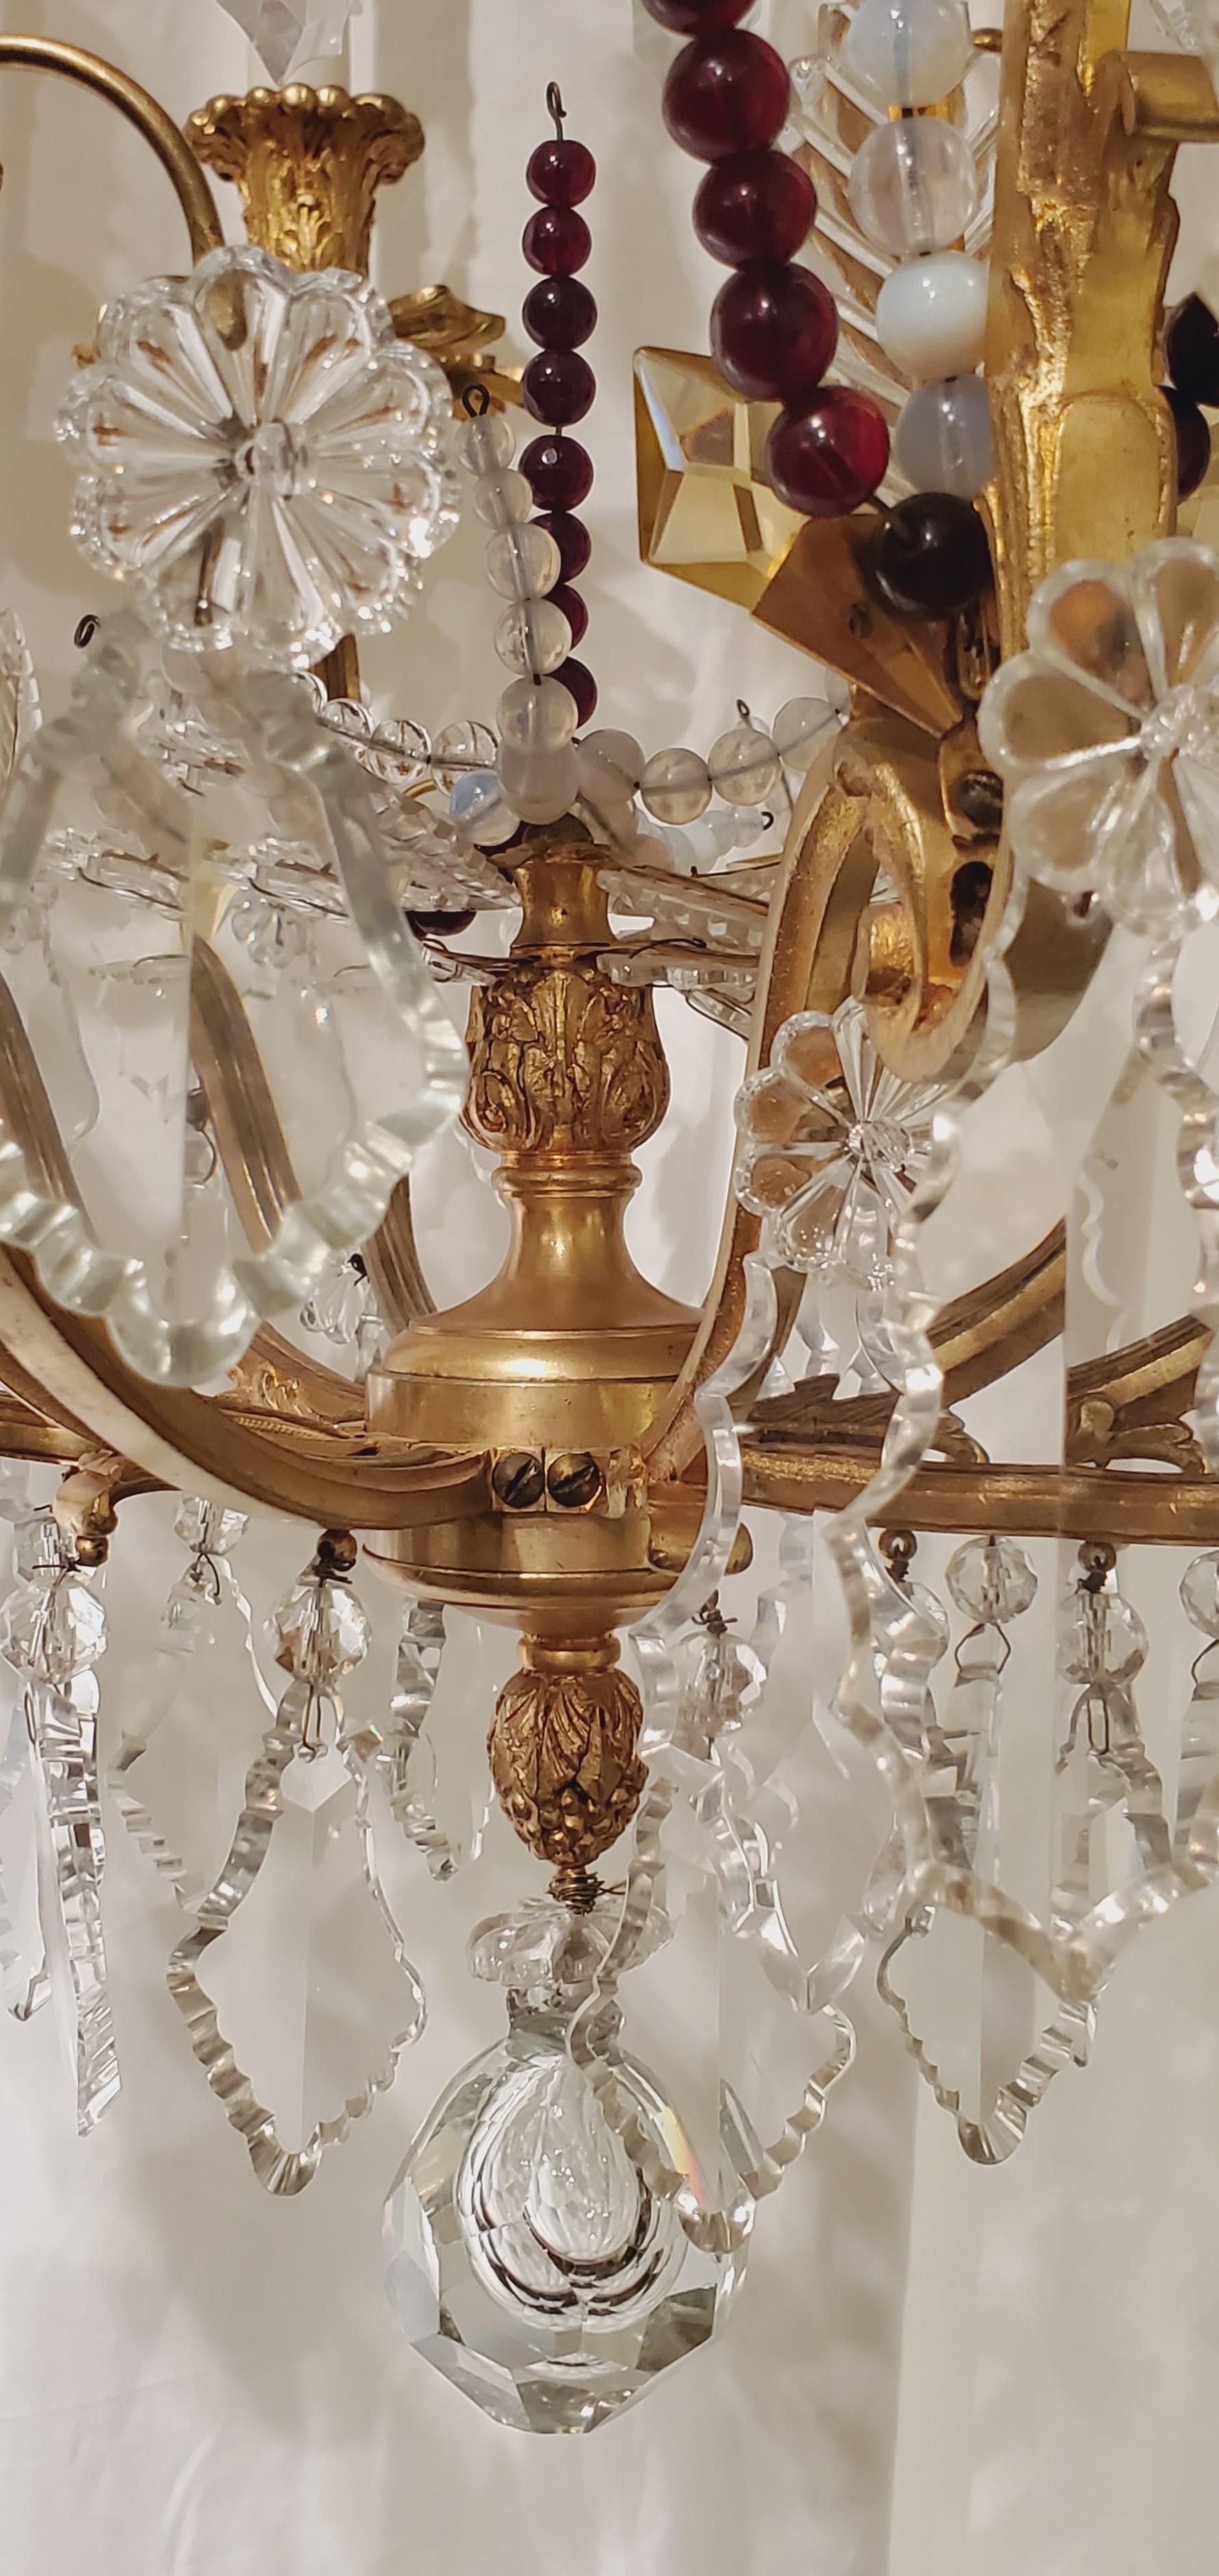 19th Century Antique French Gold Bronze and Crystal Chandelier, circa 1870-1880 For Sale